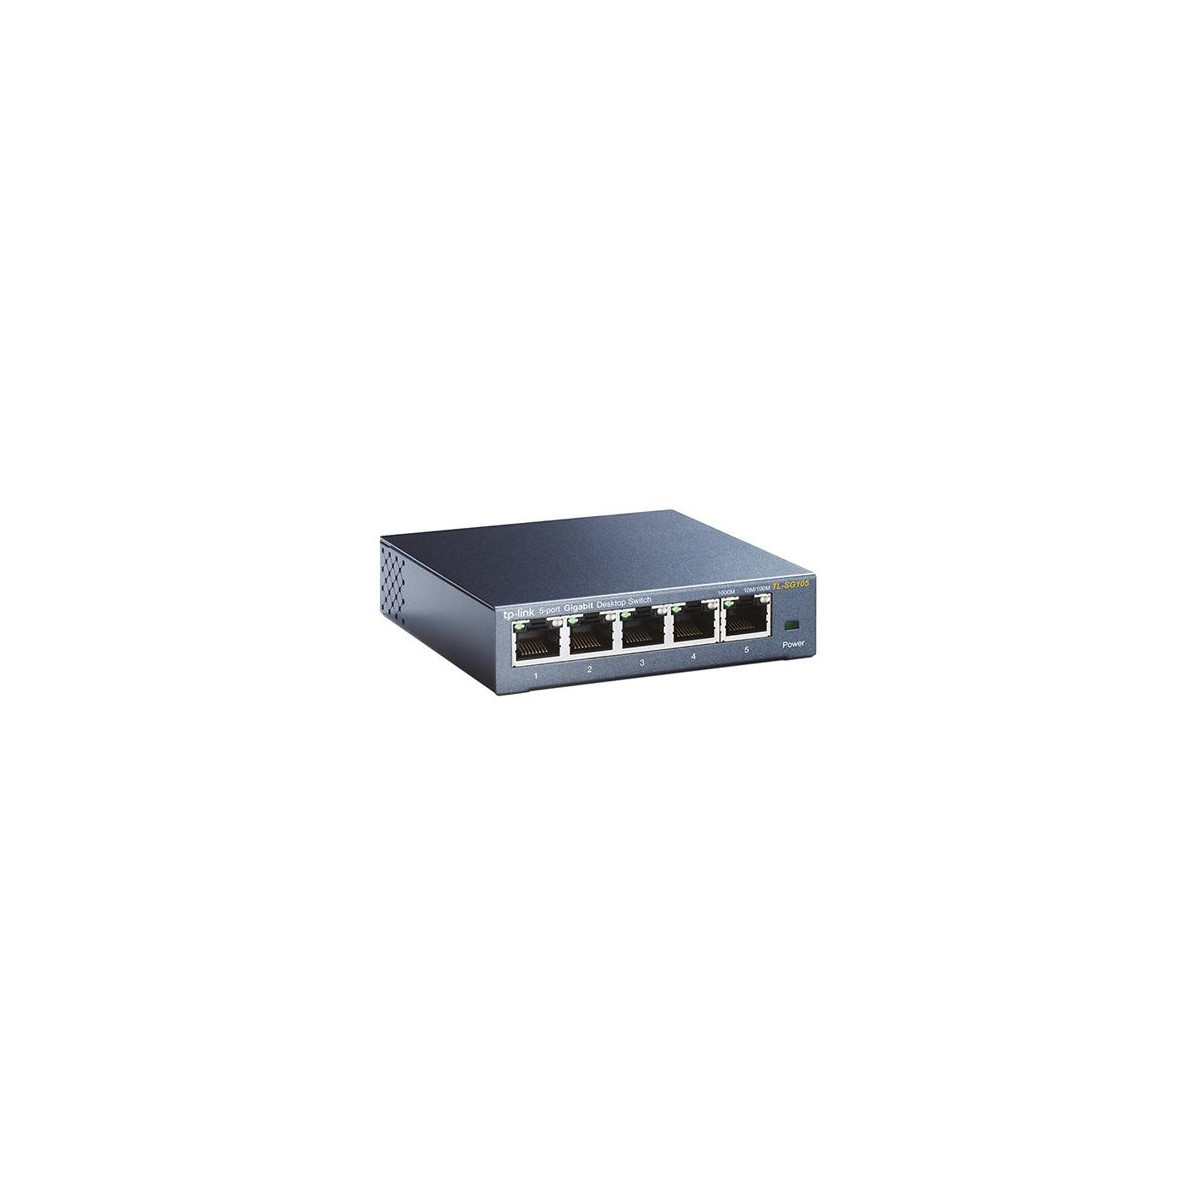 More about Switch TP-LINK TL-SG105S